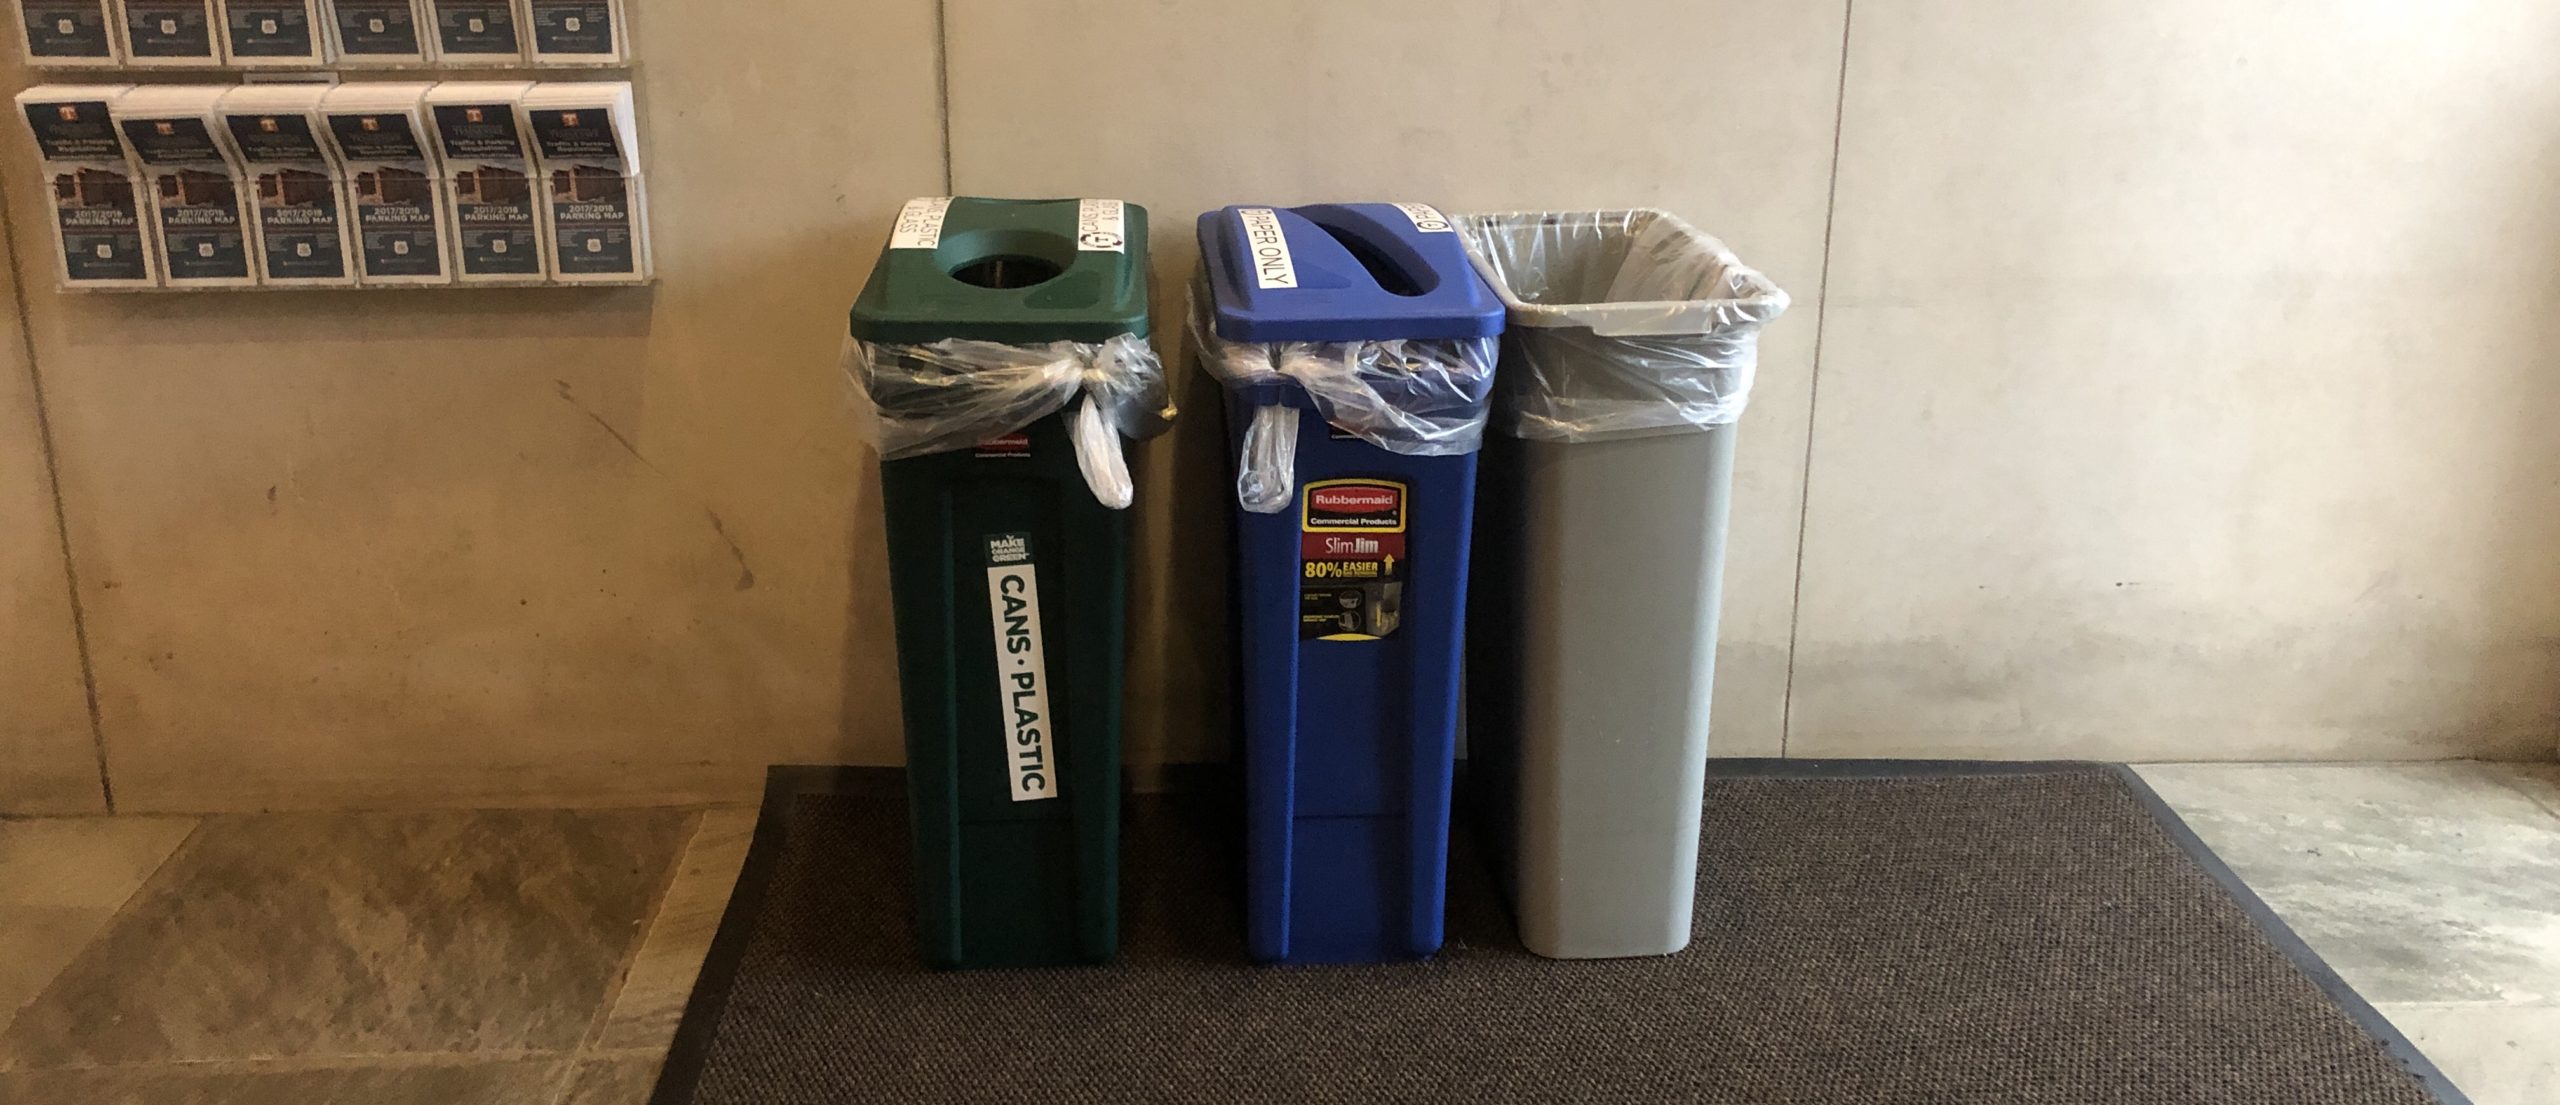 recycling bins on campus